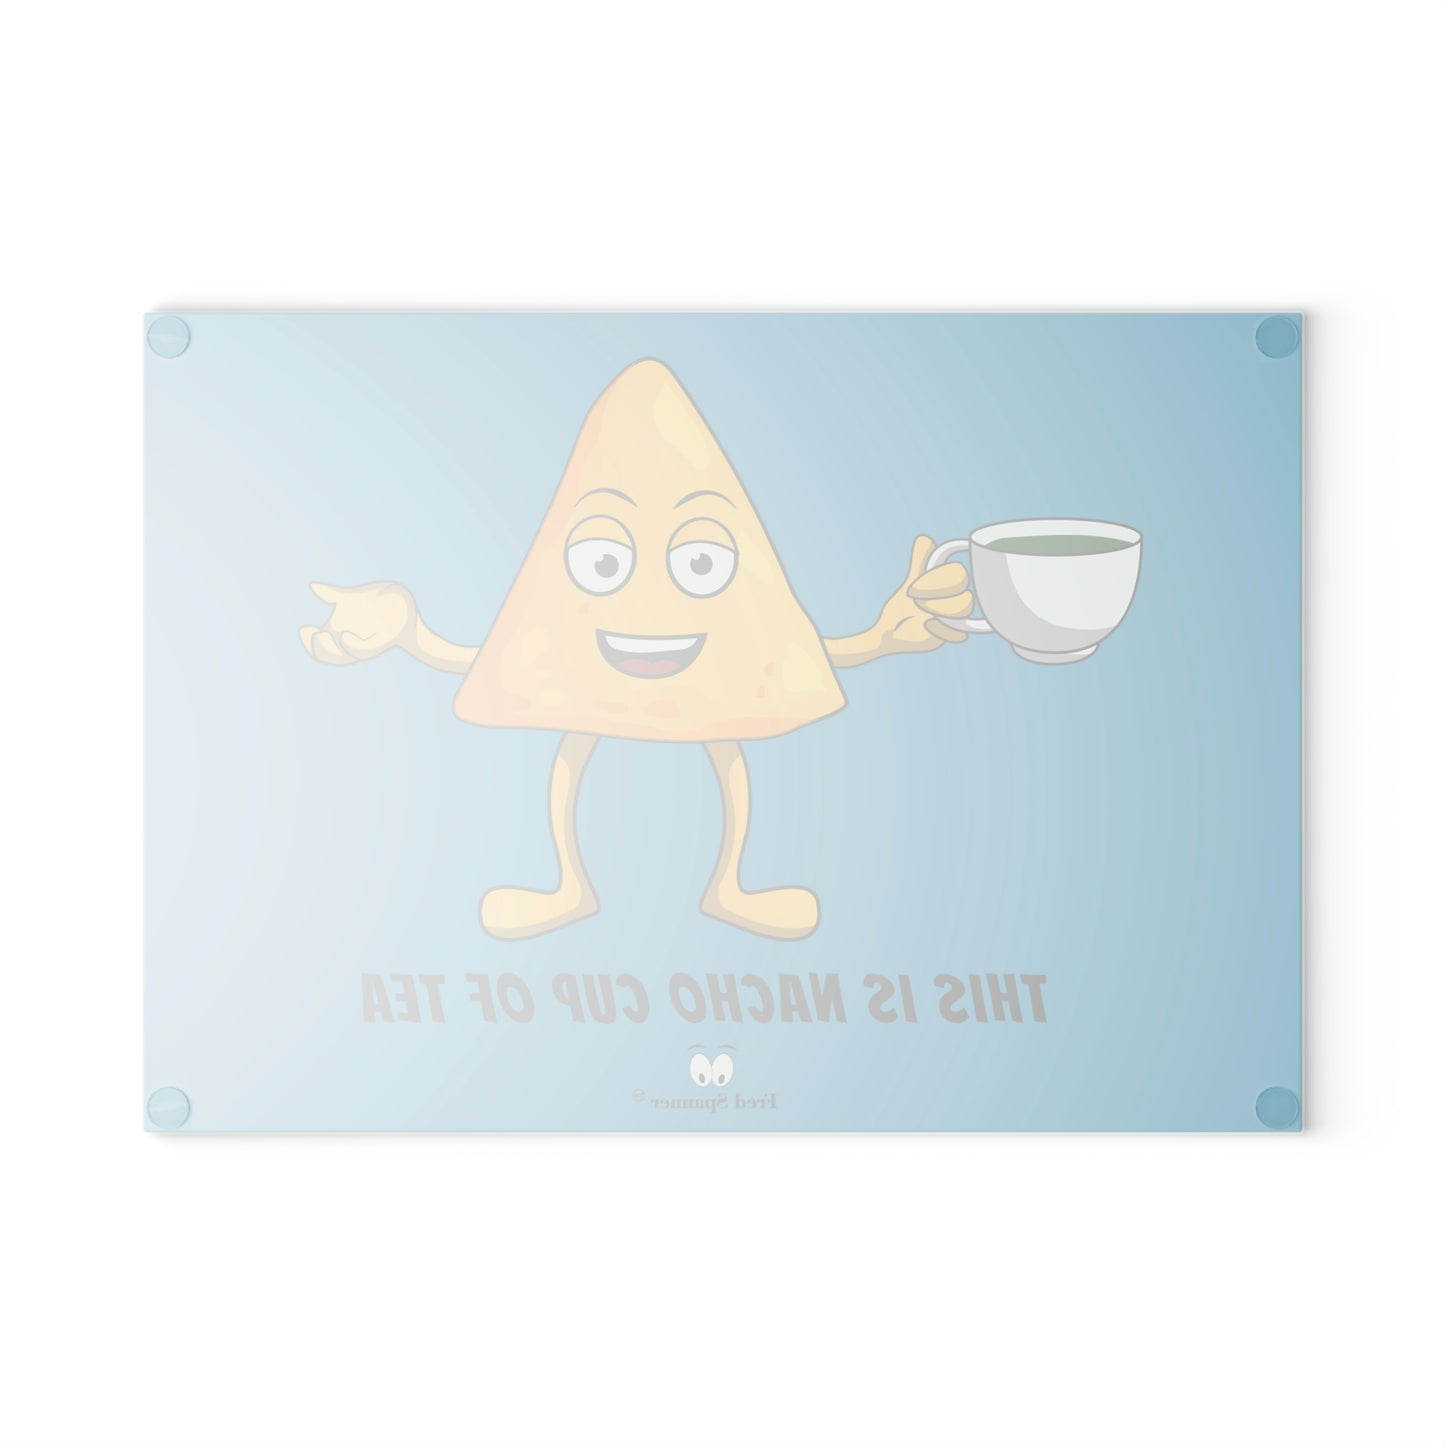 This is nacho cup of tea- Glass Cutting Board